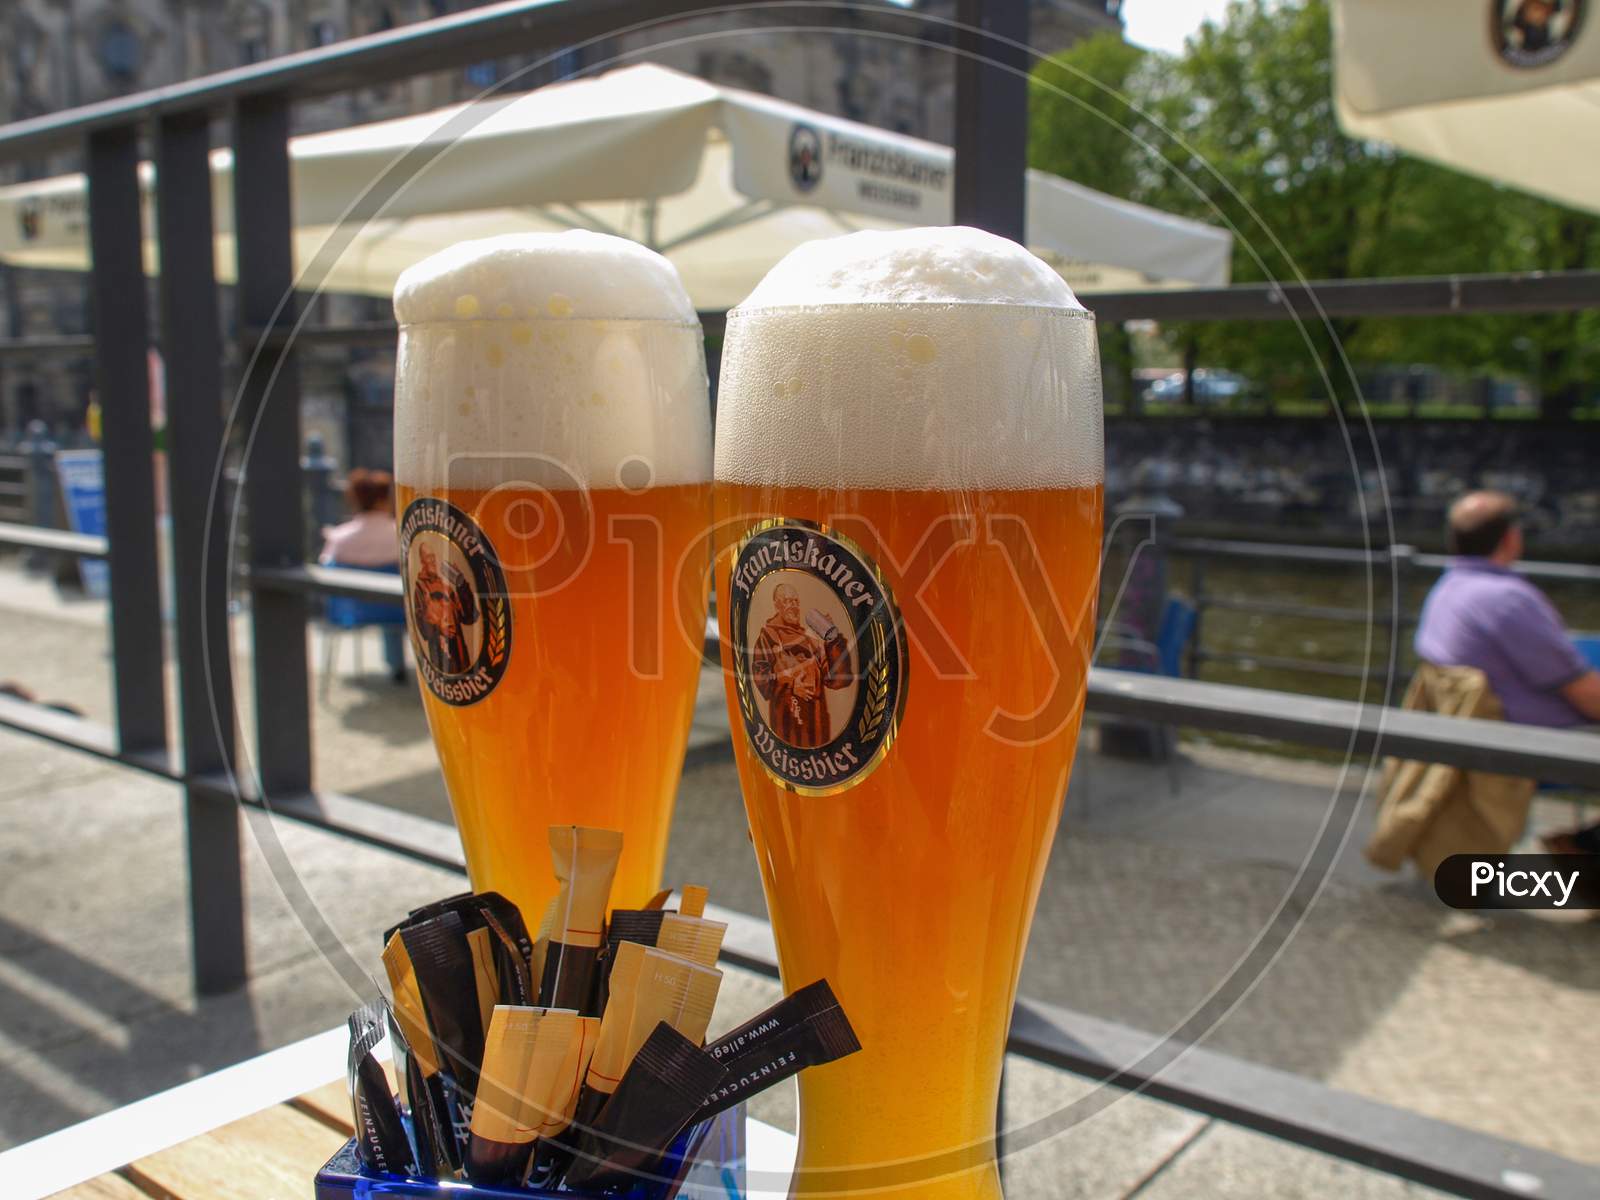 Berlin, Germany - April 24, 2010: Glasses Of German Franziskaner Weiss Beer At A Bar On River Spree Bank On April 24, 2010 In Berlin, Germany